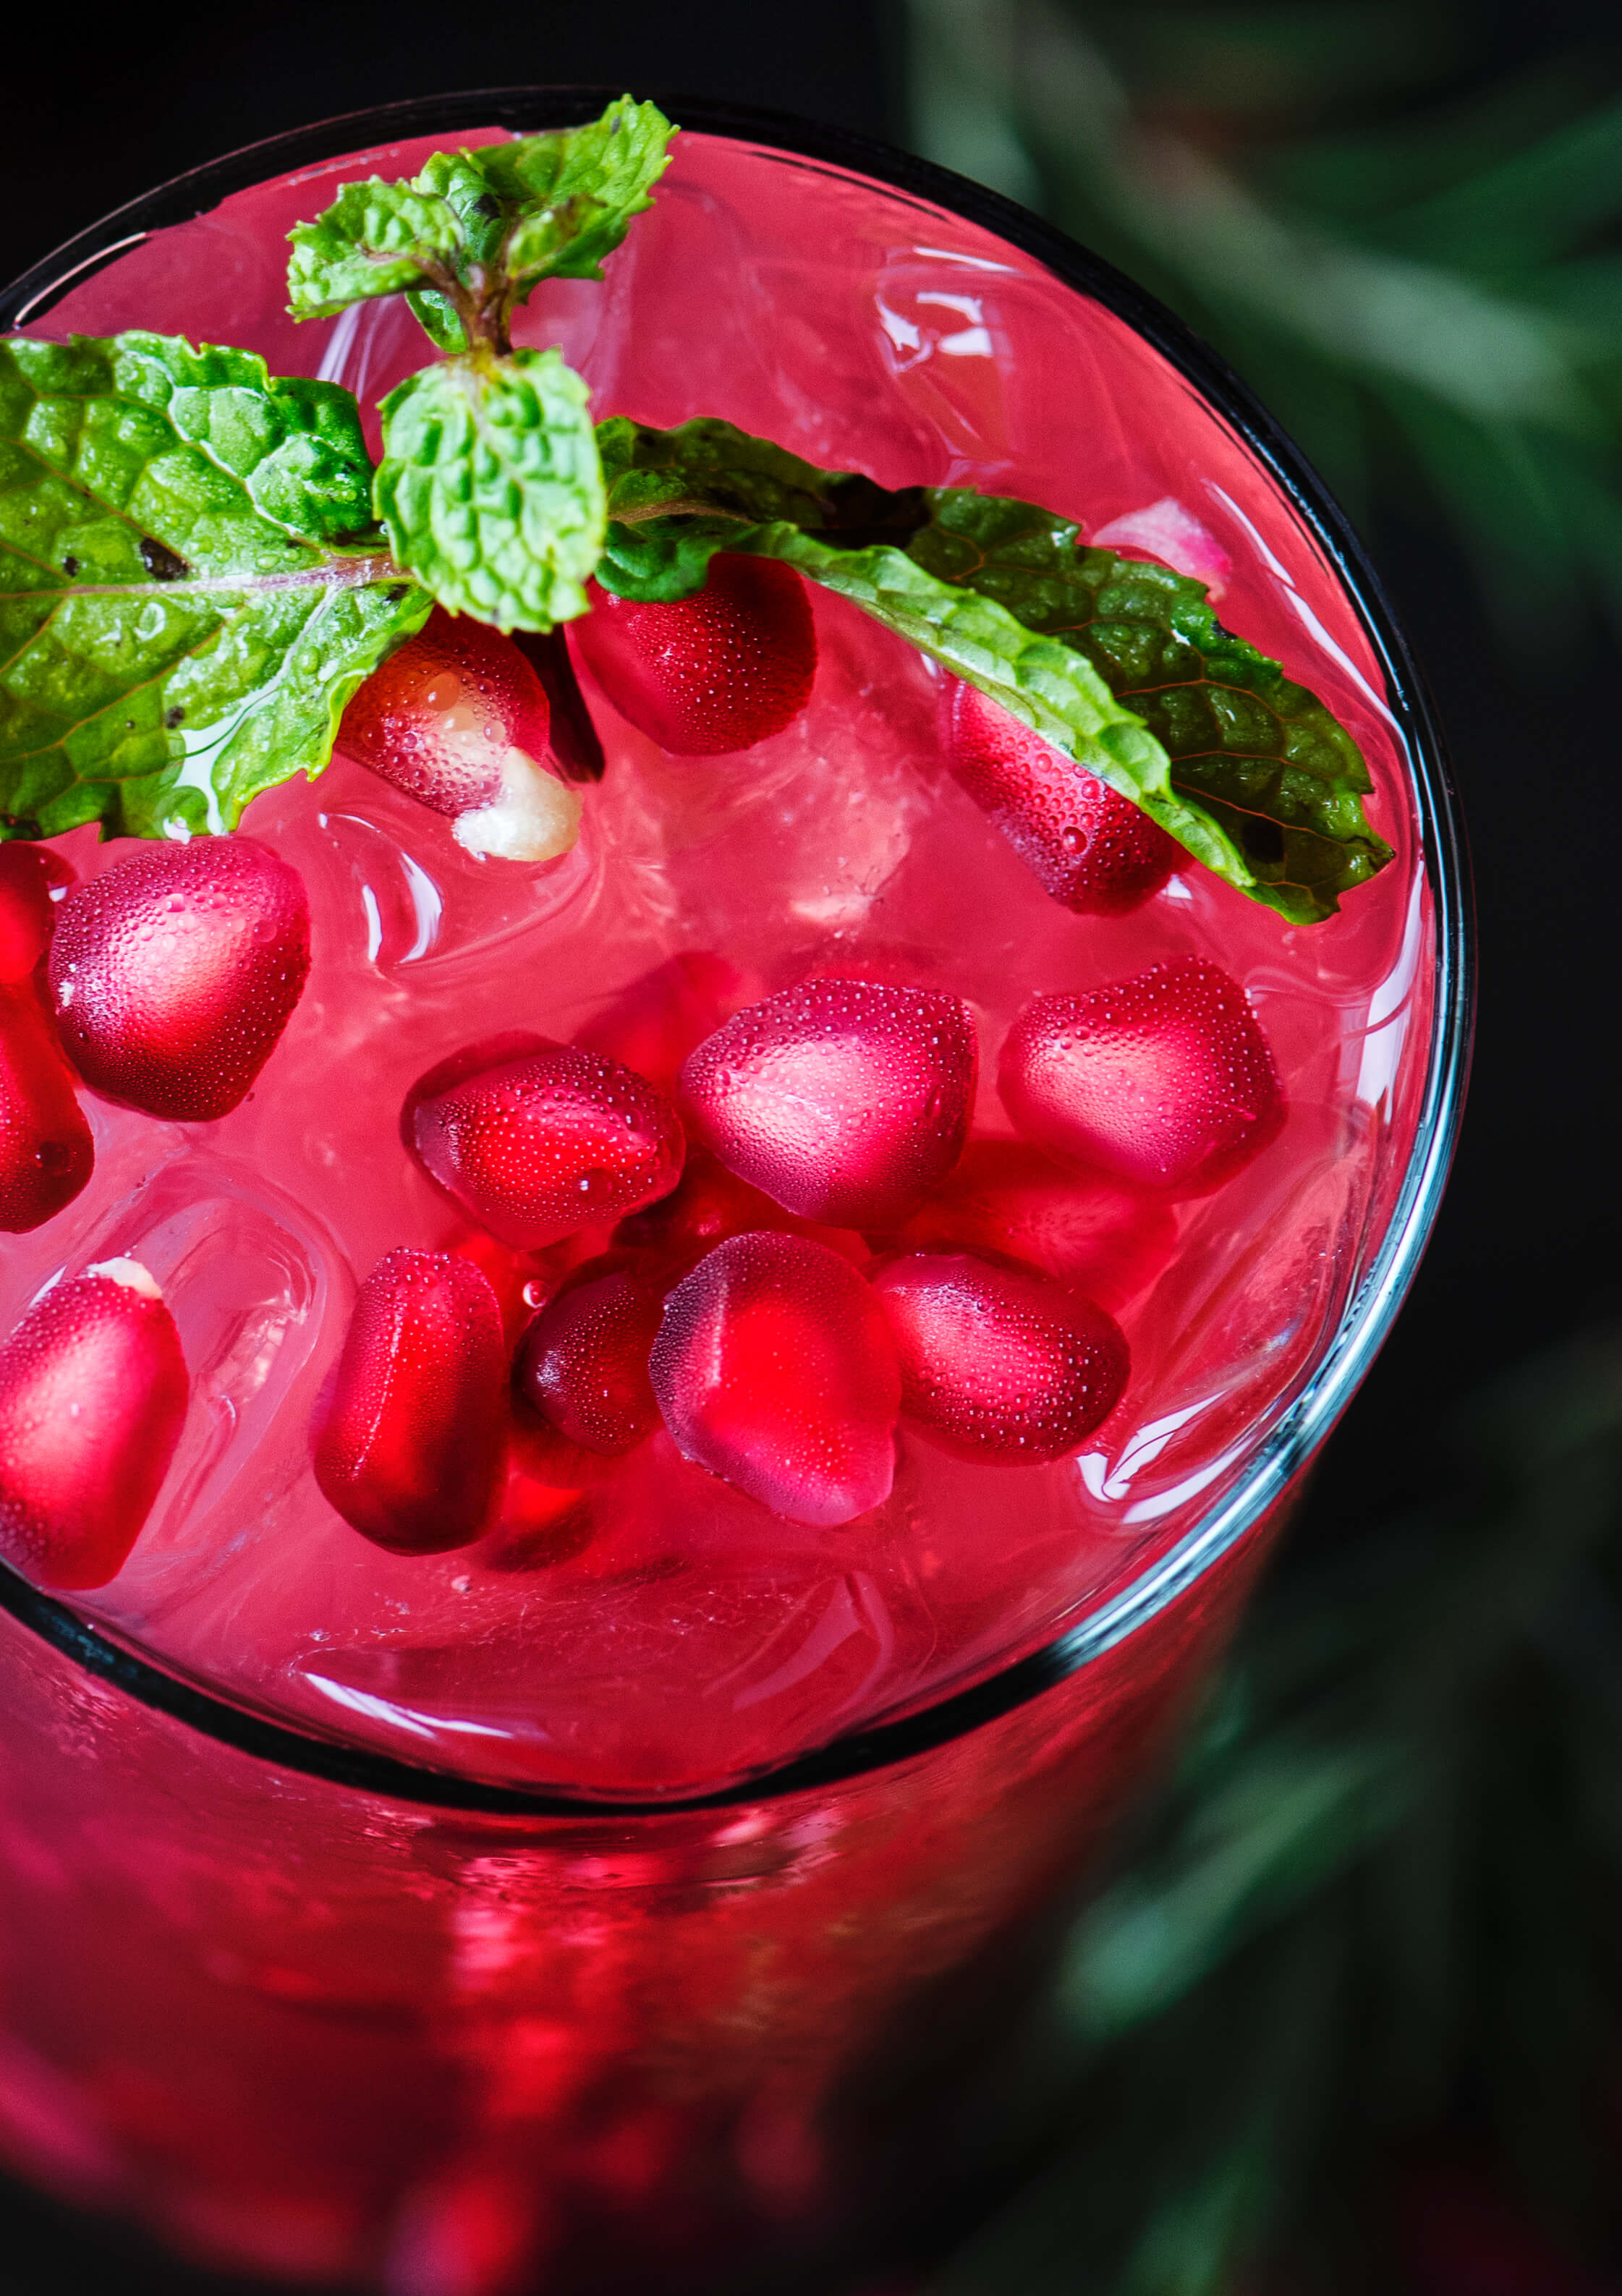 Pomegranate grape punch served cold, garnished with a mint sprig and pomegranate seeds.